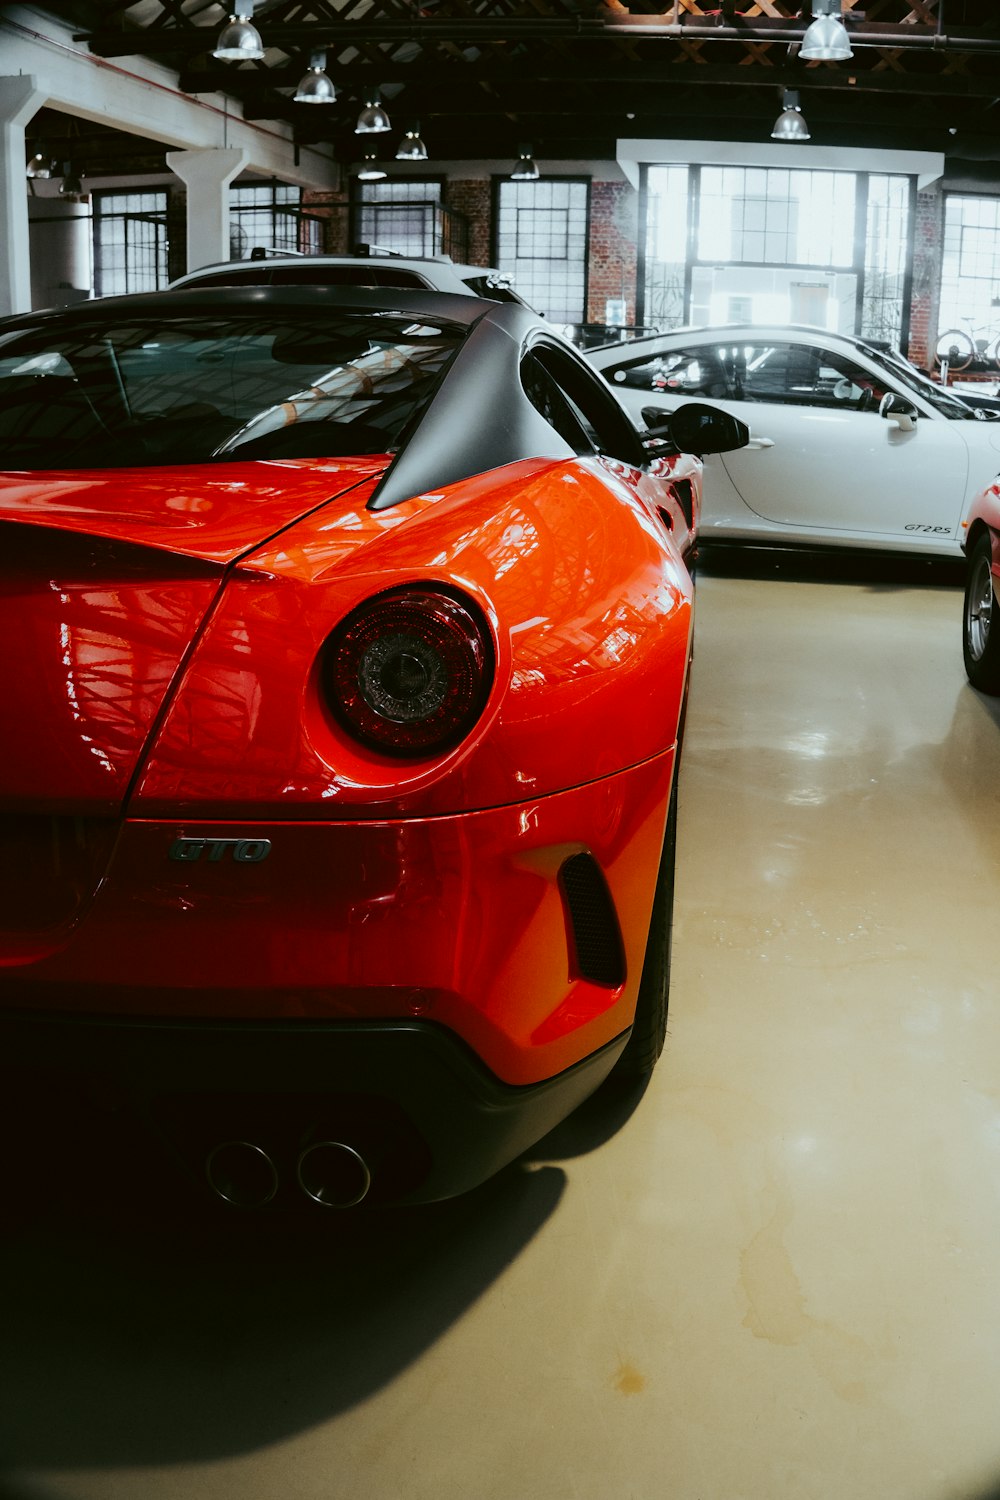 a couple of red sports cars parked in a garage